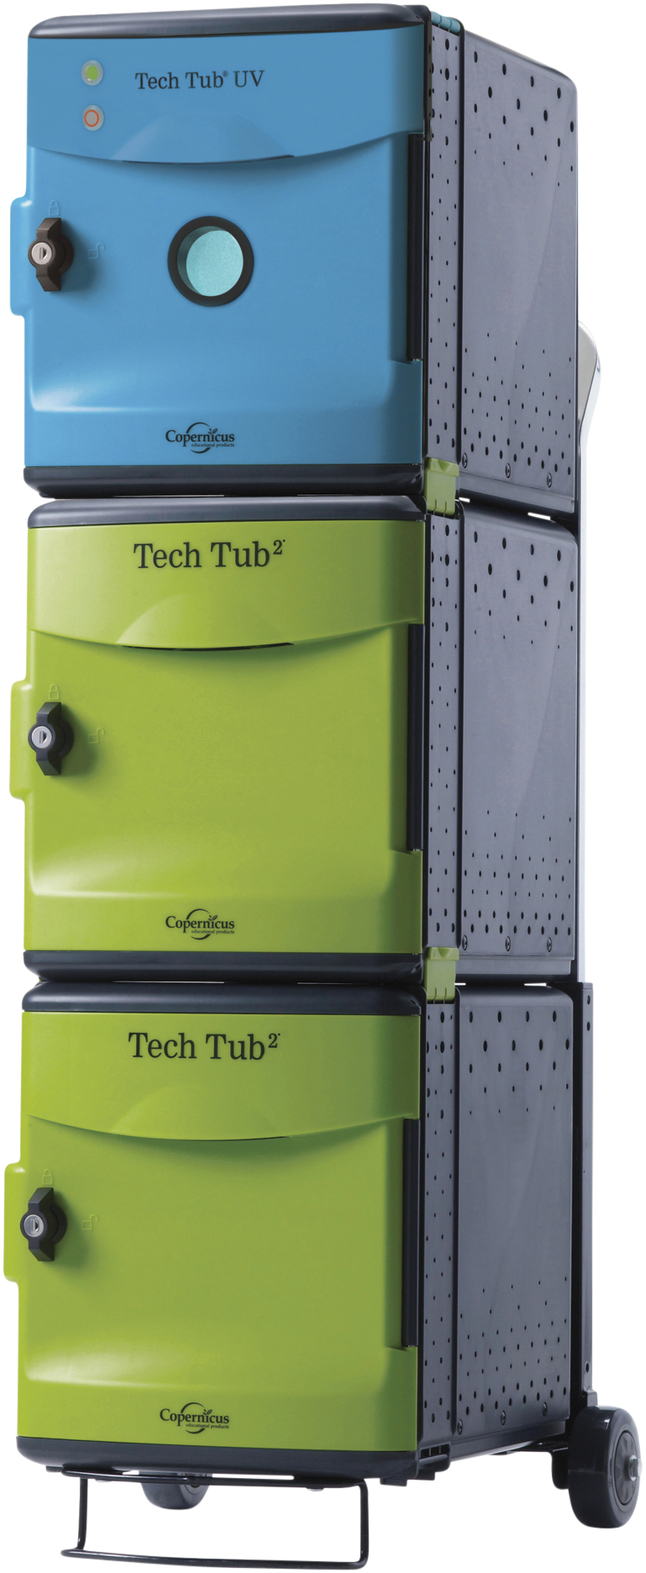 Copernicus Tech Tub2 Trolley UV Tub, Holds 10 Devices, 14-3/4 x 19-1/2 x 35-3/4 Inches, Item Number 2040934